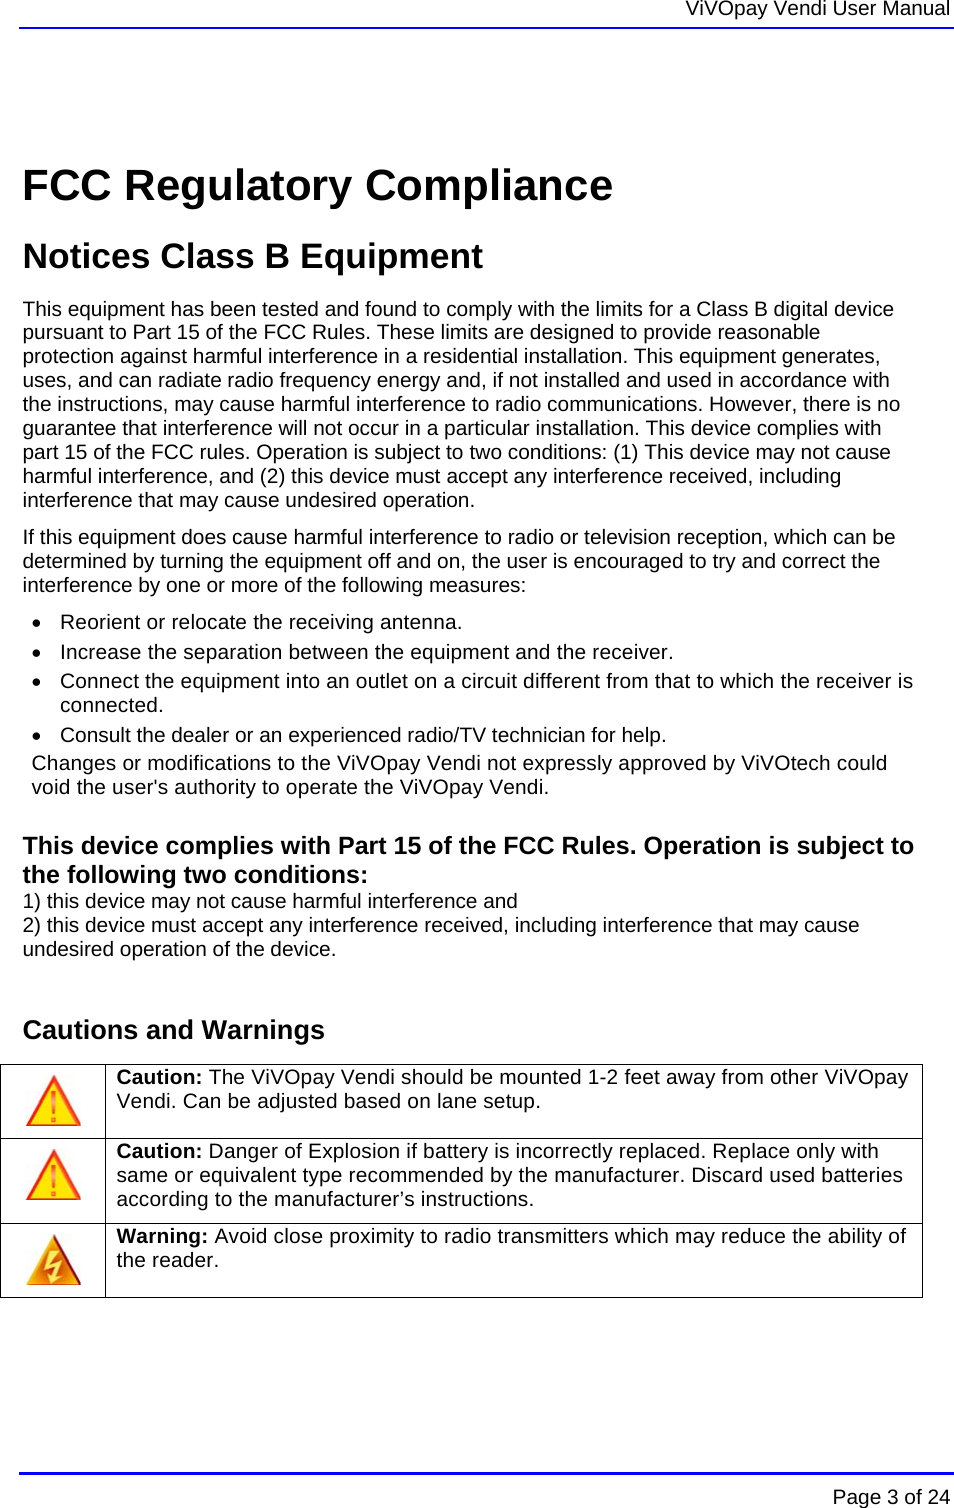   ViVOpay Vendi User Manual        Page 3 of 24     FCC Regulatory Compliance Notices Class B Equipment This equipment has been tested and found to comply with the limits for a Class B digital device pursuant to Part 15 of the FCC Rules. These limits are designed to provide reasonable protection against harmful interference in a residential installation. This equipment generates, uses, and can radiate radio frequency energy and, if not installed and used in accordance with the instructions, may cause harmful interference to radio communications. However, there is no guarantee that interference will not occur in a particular installation. This device complies with part 15 of the FCC rules. Operation is subject to two conditions: (1) This device may not cause harmful interference, and (2) this device must accept any interference received, including interference that may cause undesired operation. If this equipment does cause harmful interference to radio or television reception, which can be determined by turning the equipment off and on, the user is encouraged to try and correct the interference by one or more of the following measures:   Reorient or relocate the receiving antenna.    Increase the separation between the equipment and the receiver.   Connect the equipment into an outlet on a circuit different from that to which the receiver is connected.    Consult the dealer or an experienced radio/TV technician for help.  Changes or modifications to the ViVOpay Vendi not expressly approved by ViVOtech could void the user&apos;s authority to operate the ViVOpay Vendi.  This device complies with Part 15 of the FCC Rules. Operation is subject to the following two conditions:  1) this device may not cause harmful interference and 2) this device must accept any interference received, including interference that may cause undesired operation of the device.  Cautions and Warnings  Caution: The ViVOpay Vendi should be mounted 1-2 feet away from other ViVOpay Vendi. Can be adjusted based on lane setup.  Caution: Danger of Explosion if battery is incorrectly replaced. Replace only with same or equivalent type recommended by the manufacturer. Discard used batteries according to the manufacturer’s instructions.  Warning: Avoid close proximity to radio transmitters which may reduce the ability of the reader.    